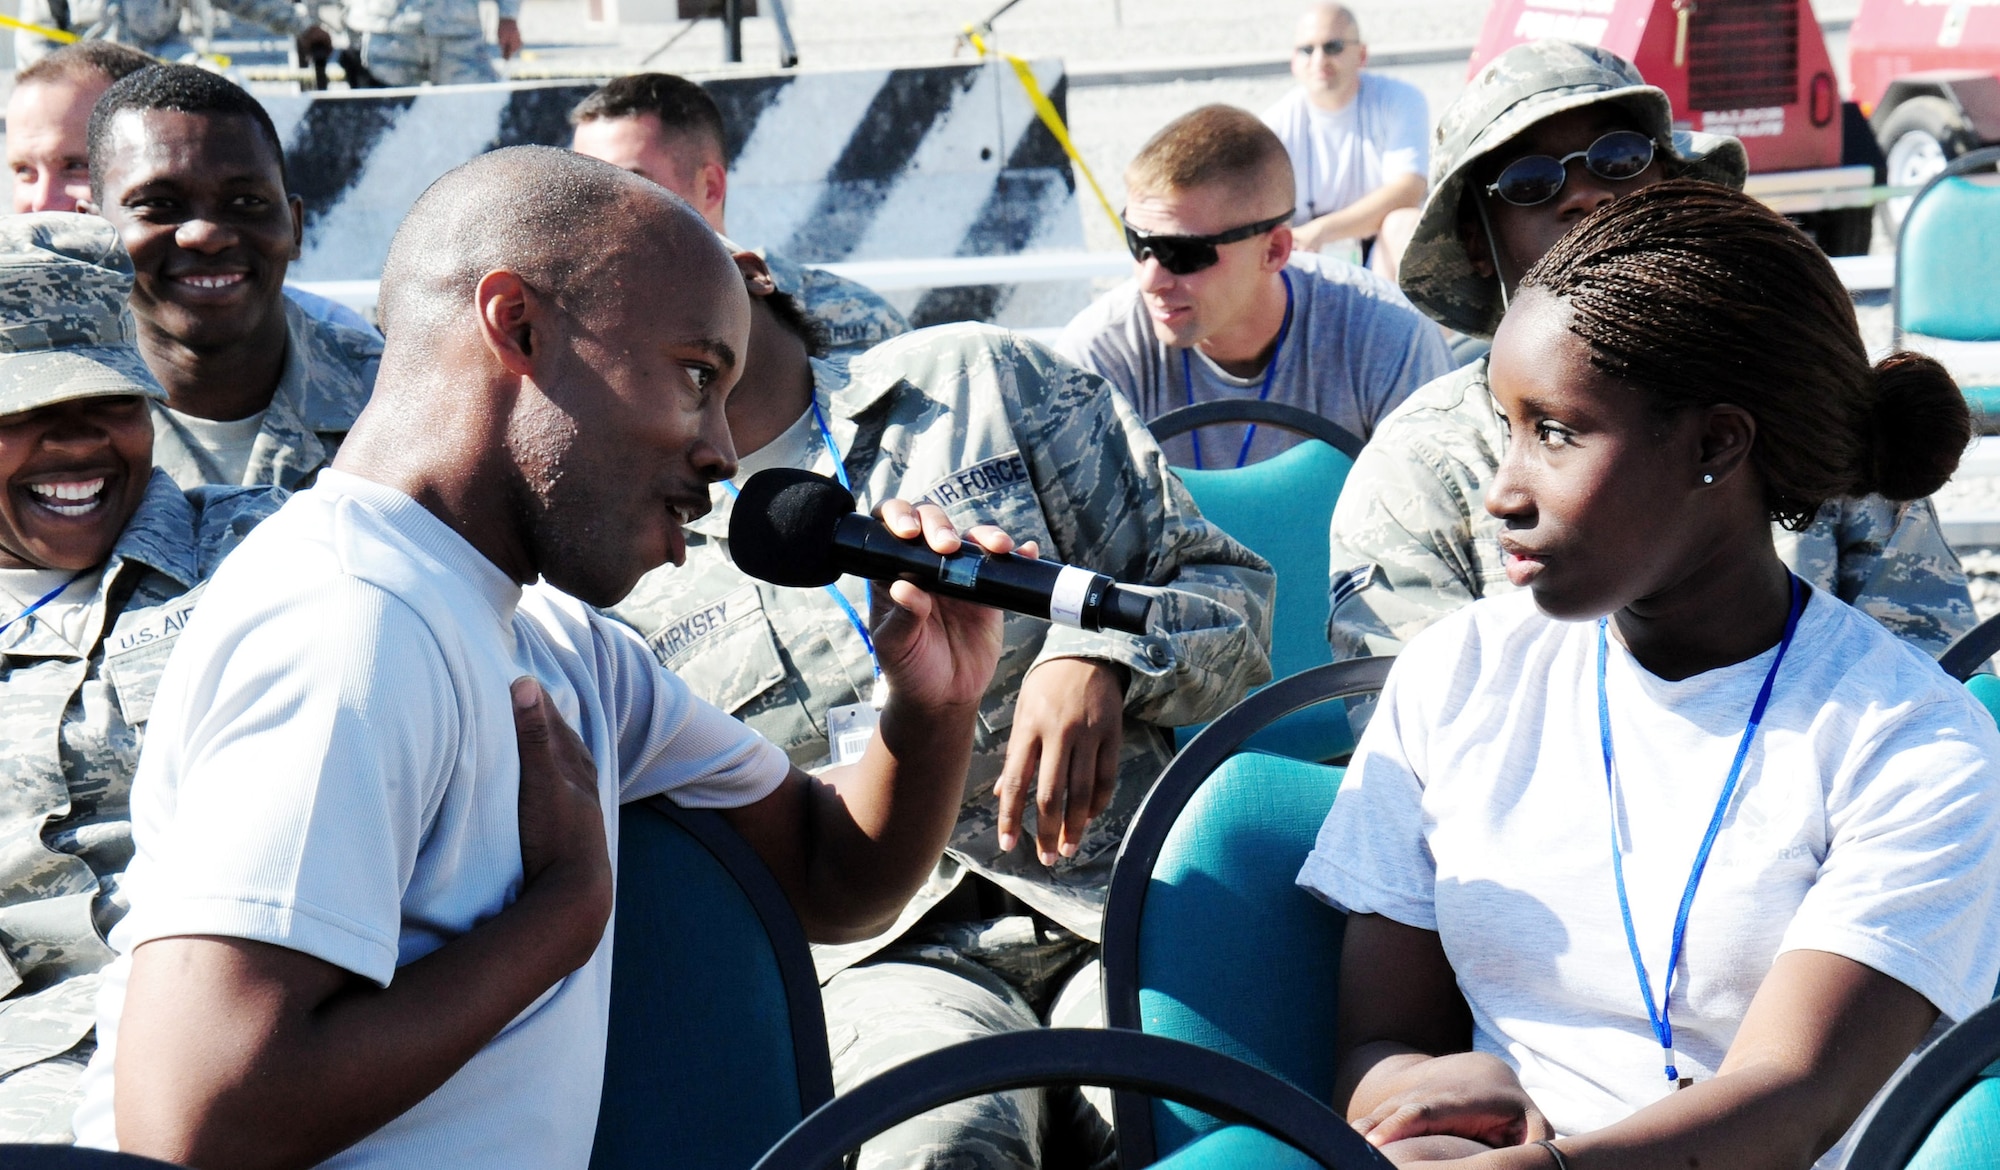 Senior Airman Demetrius Johnson sings Rod Stewart's "Have I Told You Lately That I Love You" to Airman 1st Class Ashley Jackson during a July 10 show at Manas Air Base, Kyrgyzstan. Airman Johnson is a Tops In Blue vocalist, and Airman Jackson is assigned to the 2nd Logistics Readiness Squadron. (U.S. Air Force photo/Staff Sgt. Tyrona Pearsall) 
